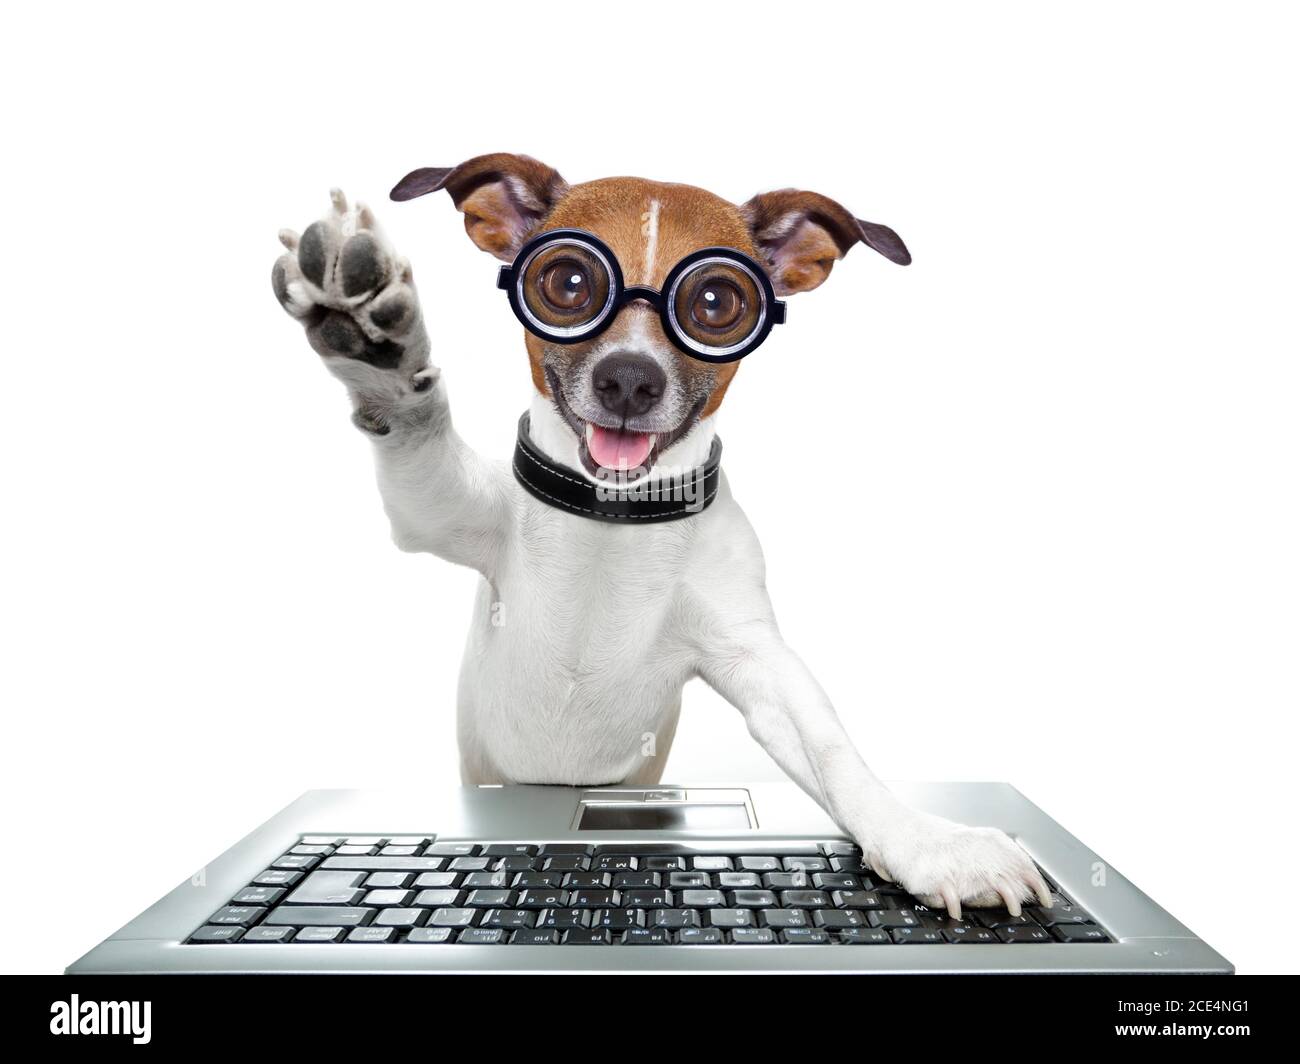 silly computer dog Stock Photo